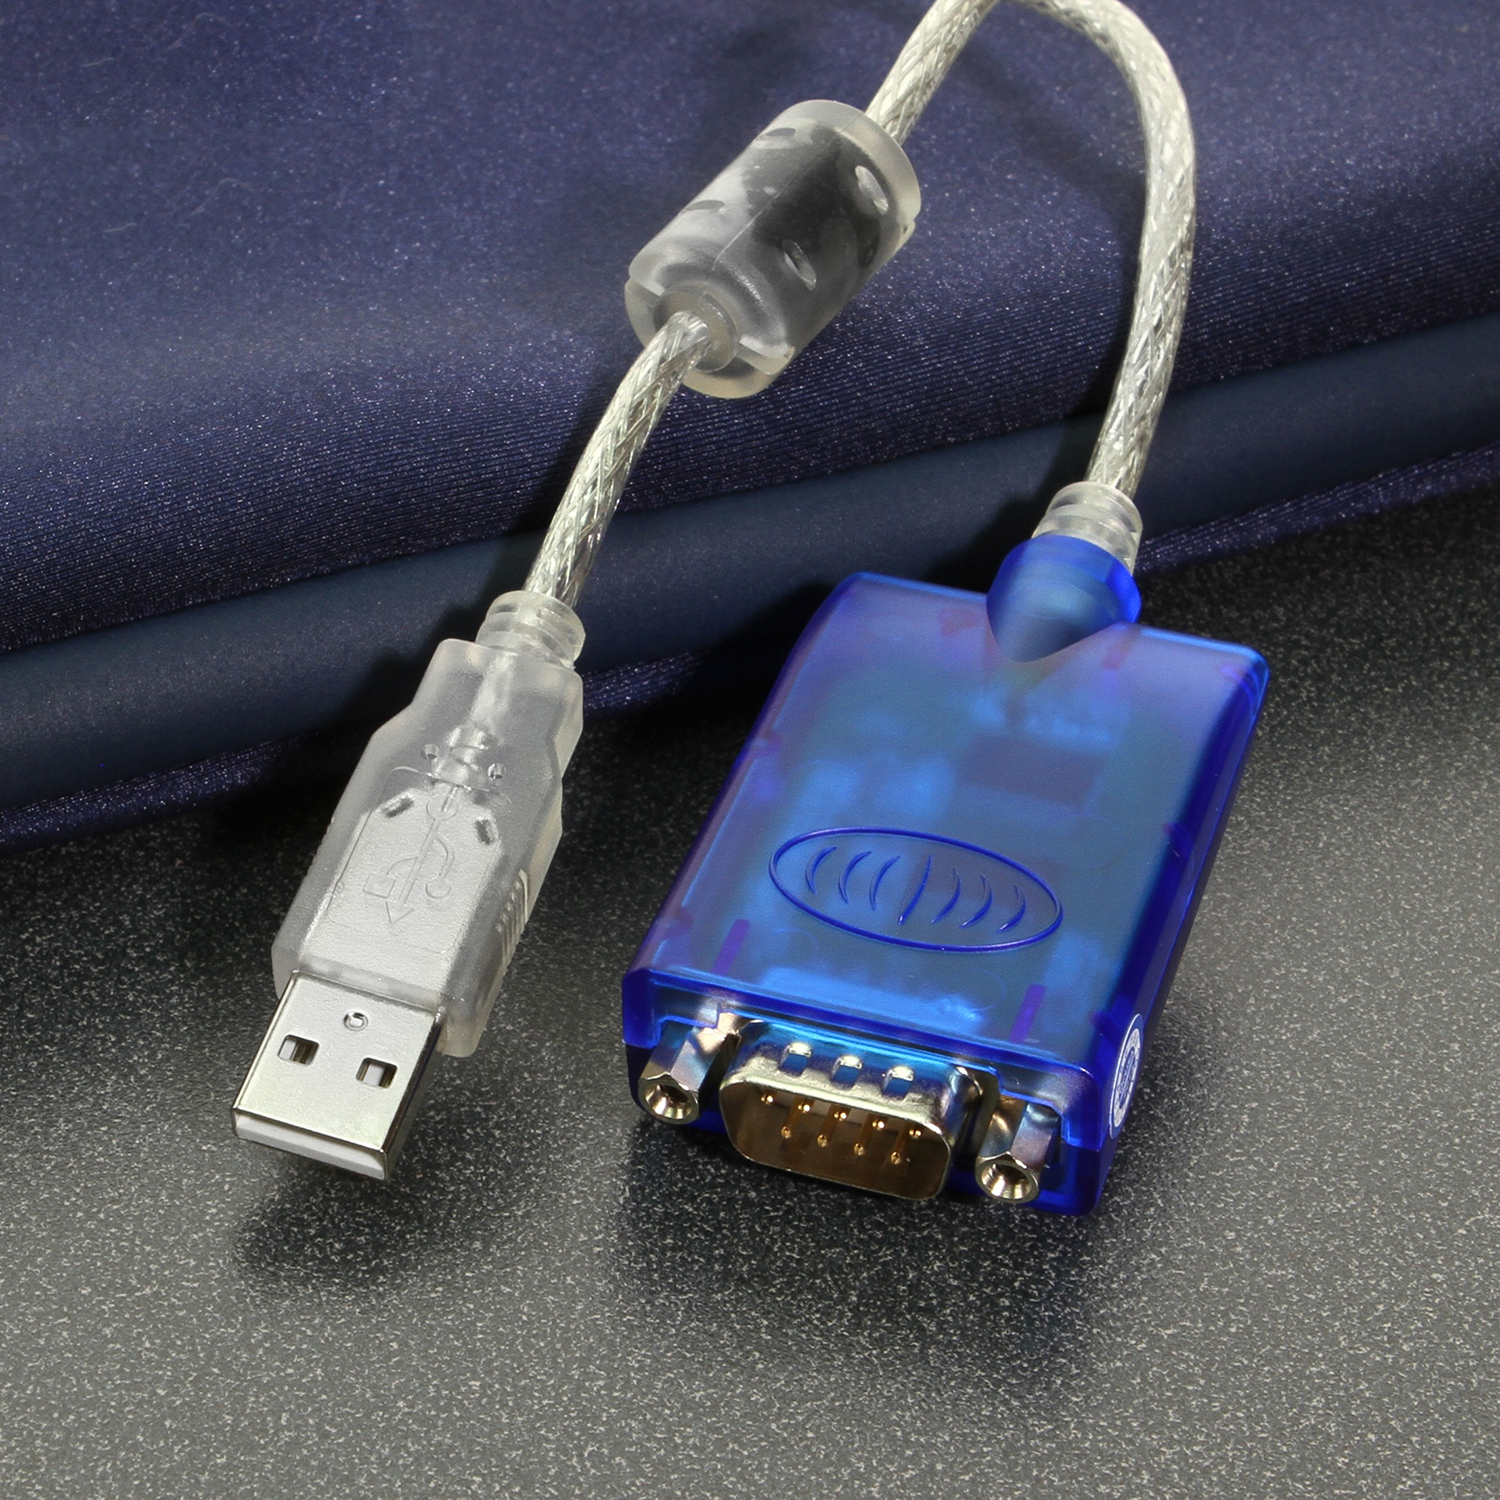 USB 2.0 RS-232 Serial Adapter with Indicators